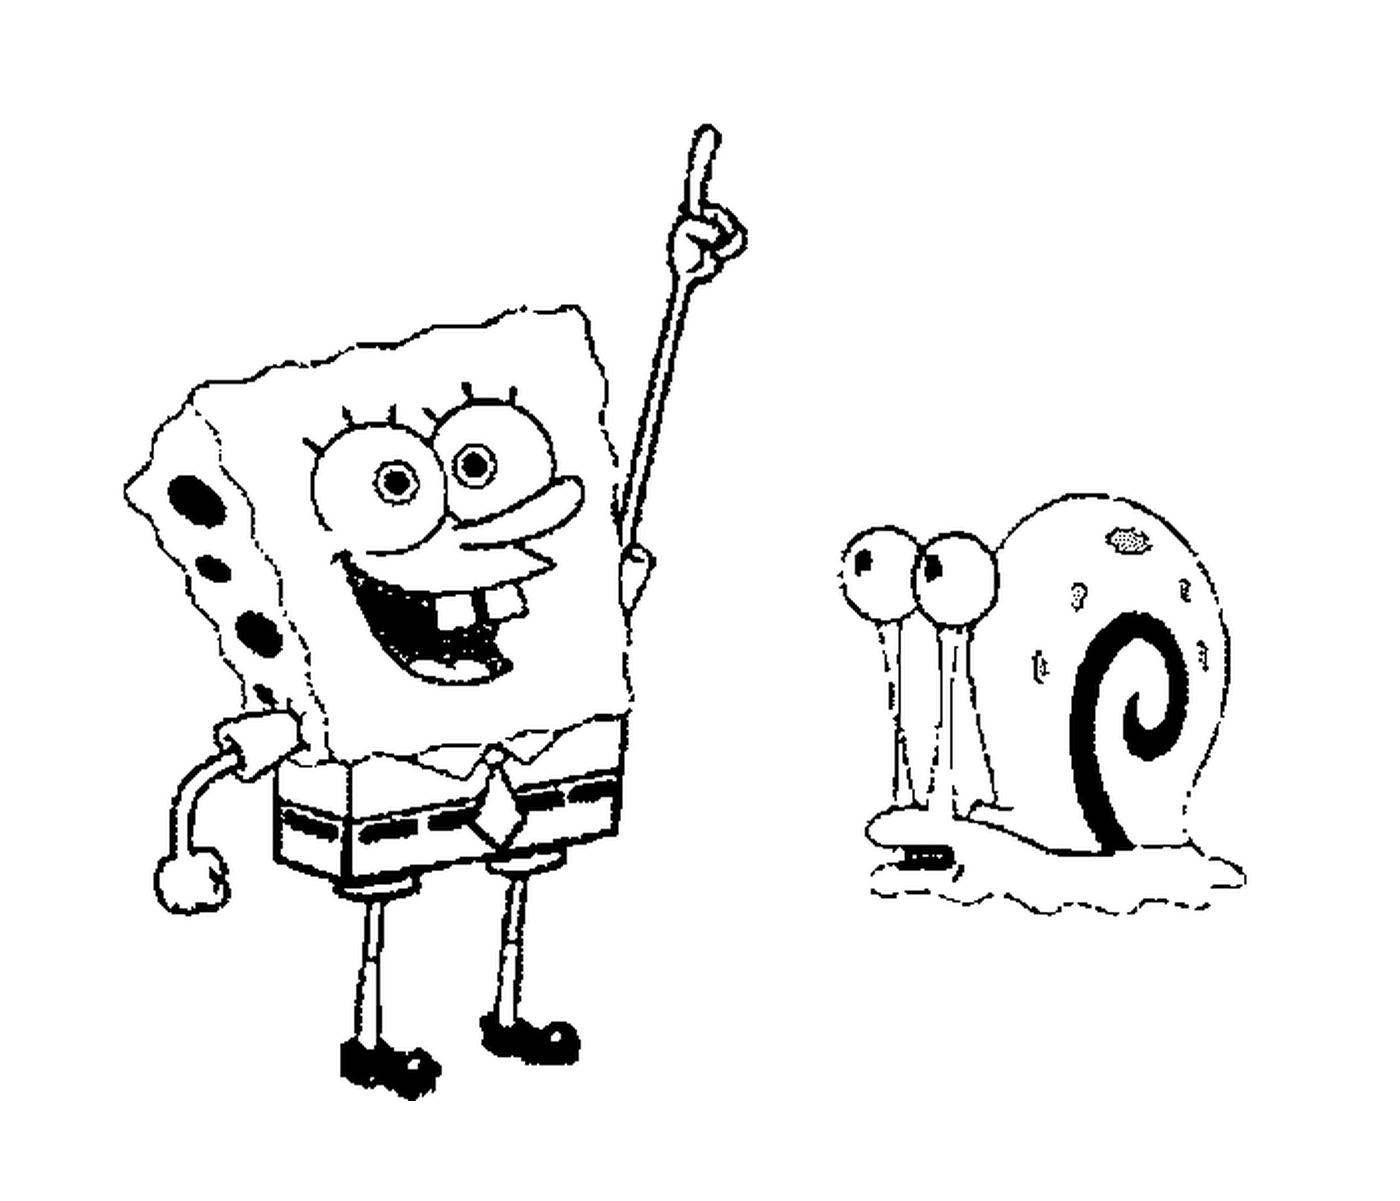  Image of Bob the Sponge and a snail 